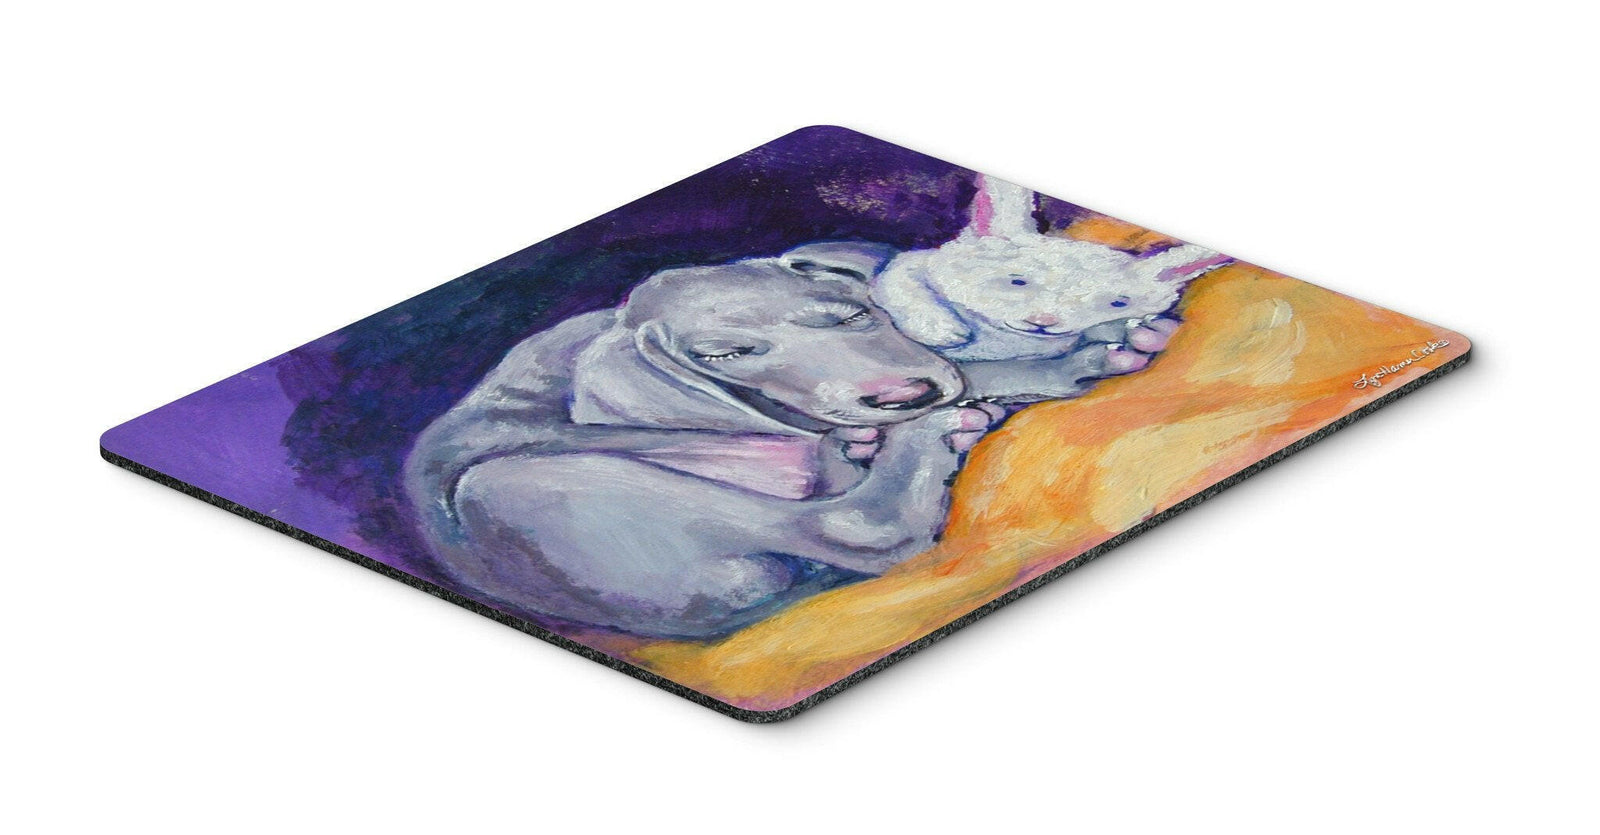 Weimaraner Snuggle Bunny Mouse Pad, Hot Pad or Trivet 7354MP by Caroline's Treasures